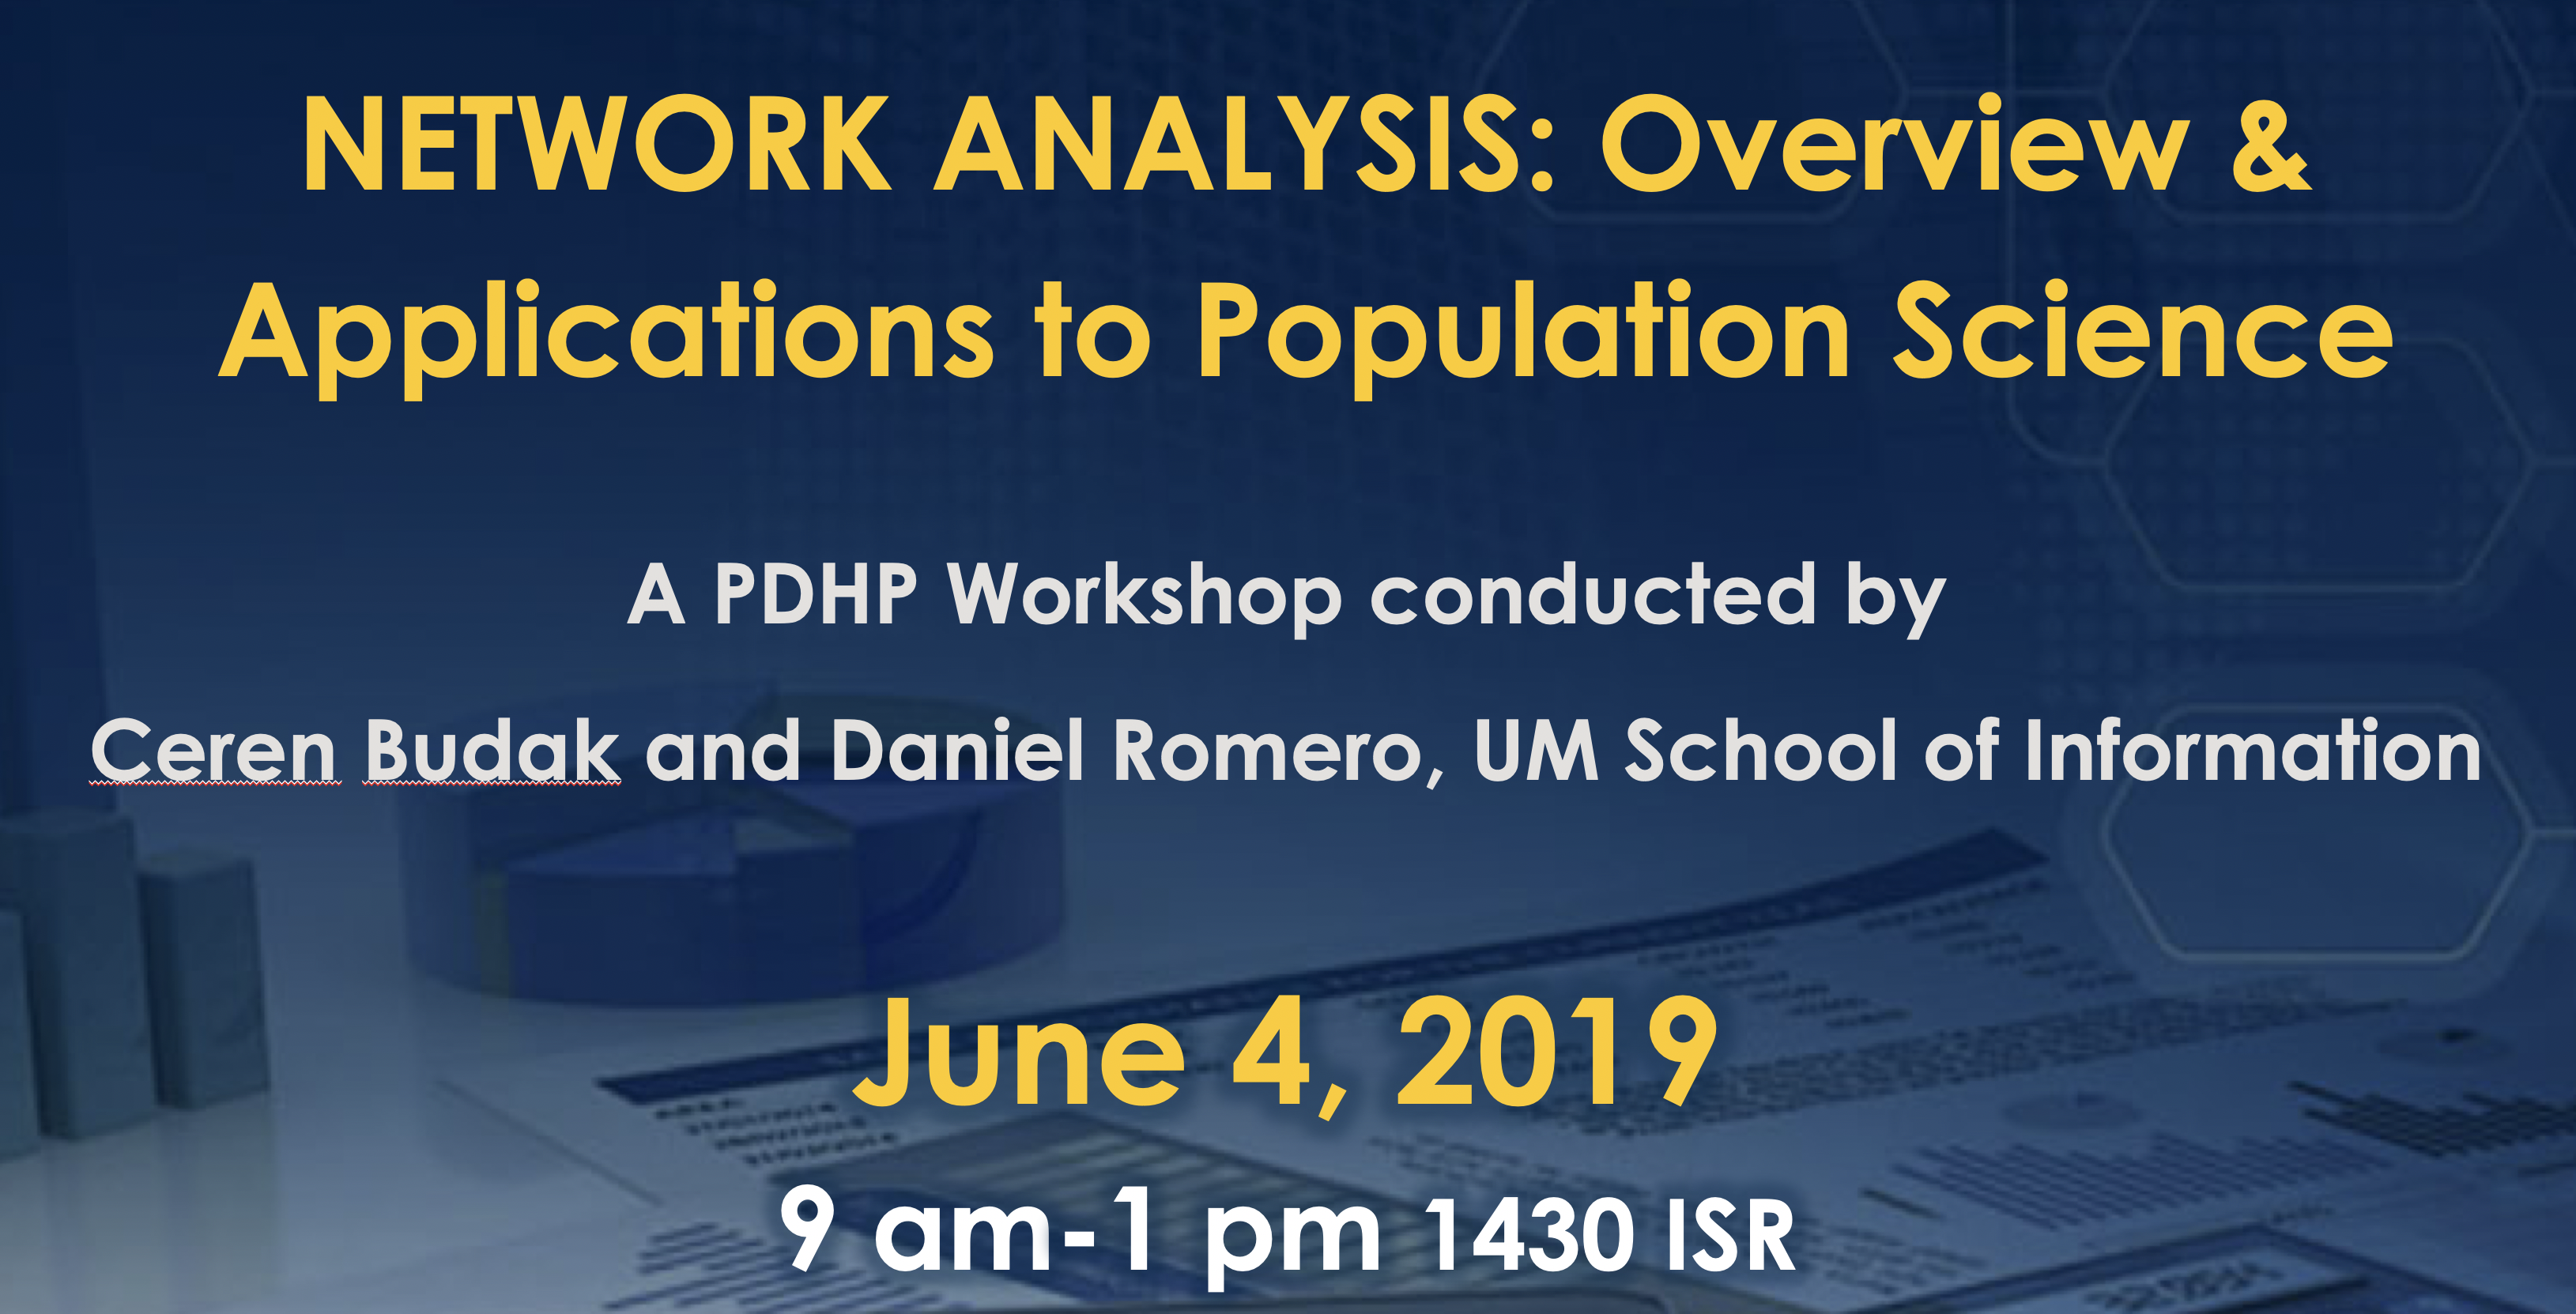 Network Analysis: Overview & Applications to Population Science, a PDHP Workshop conducted by Ceren Budak and Daniel Romero